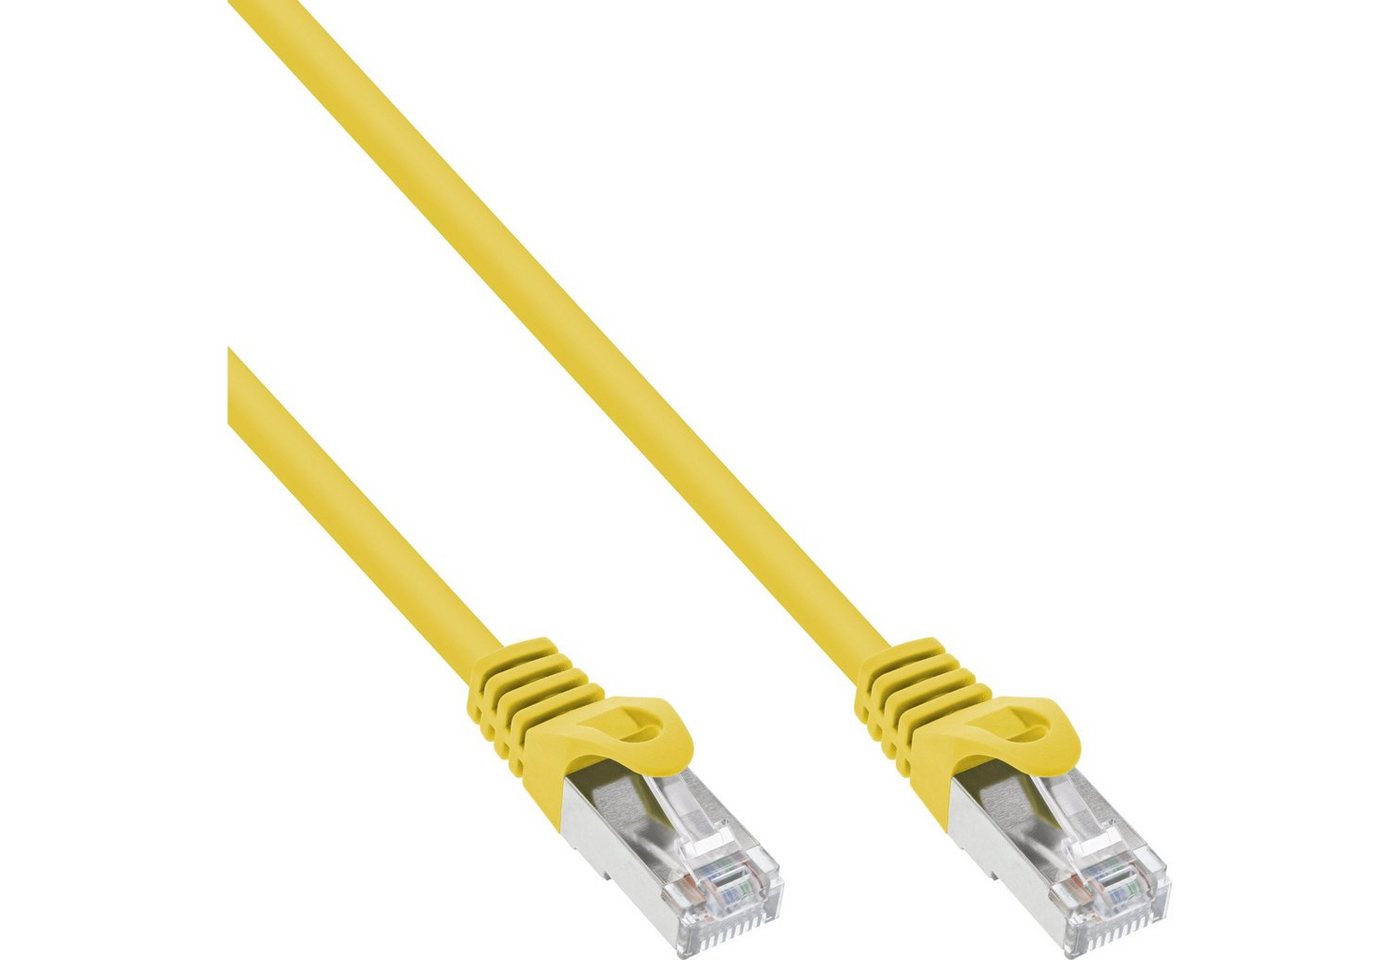 INTOS ELECTRONIC AG InLine® Patchkabel, F/UTP, Cat.5e, gelb, 5m LAN-Kabel von INTOS ELECTRONIC AG